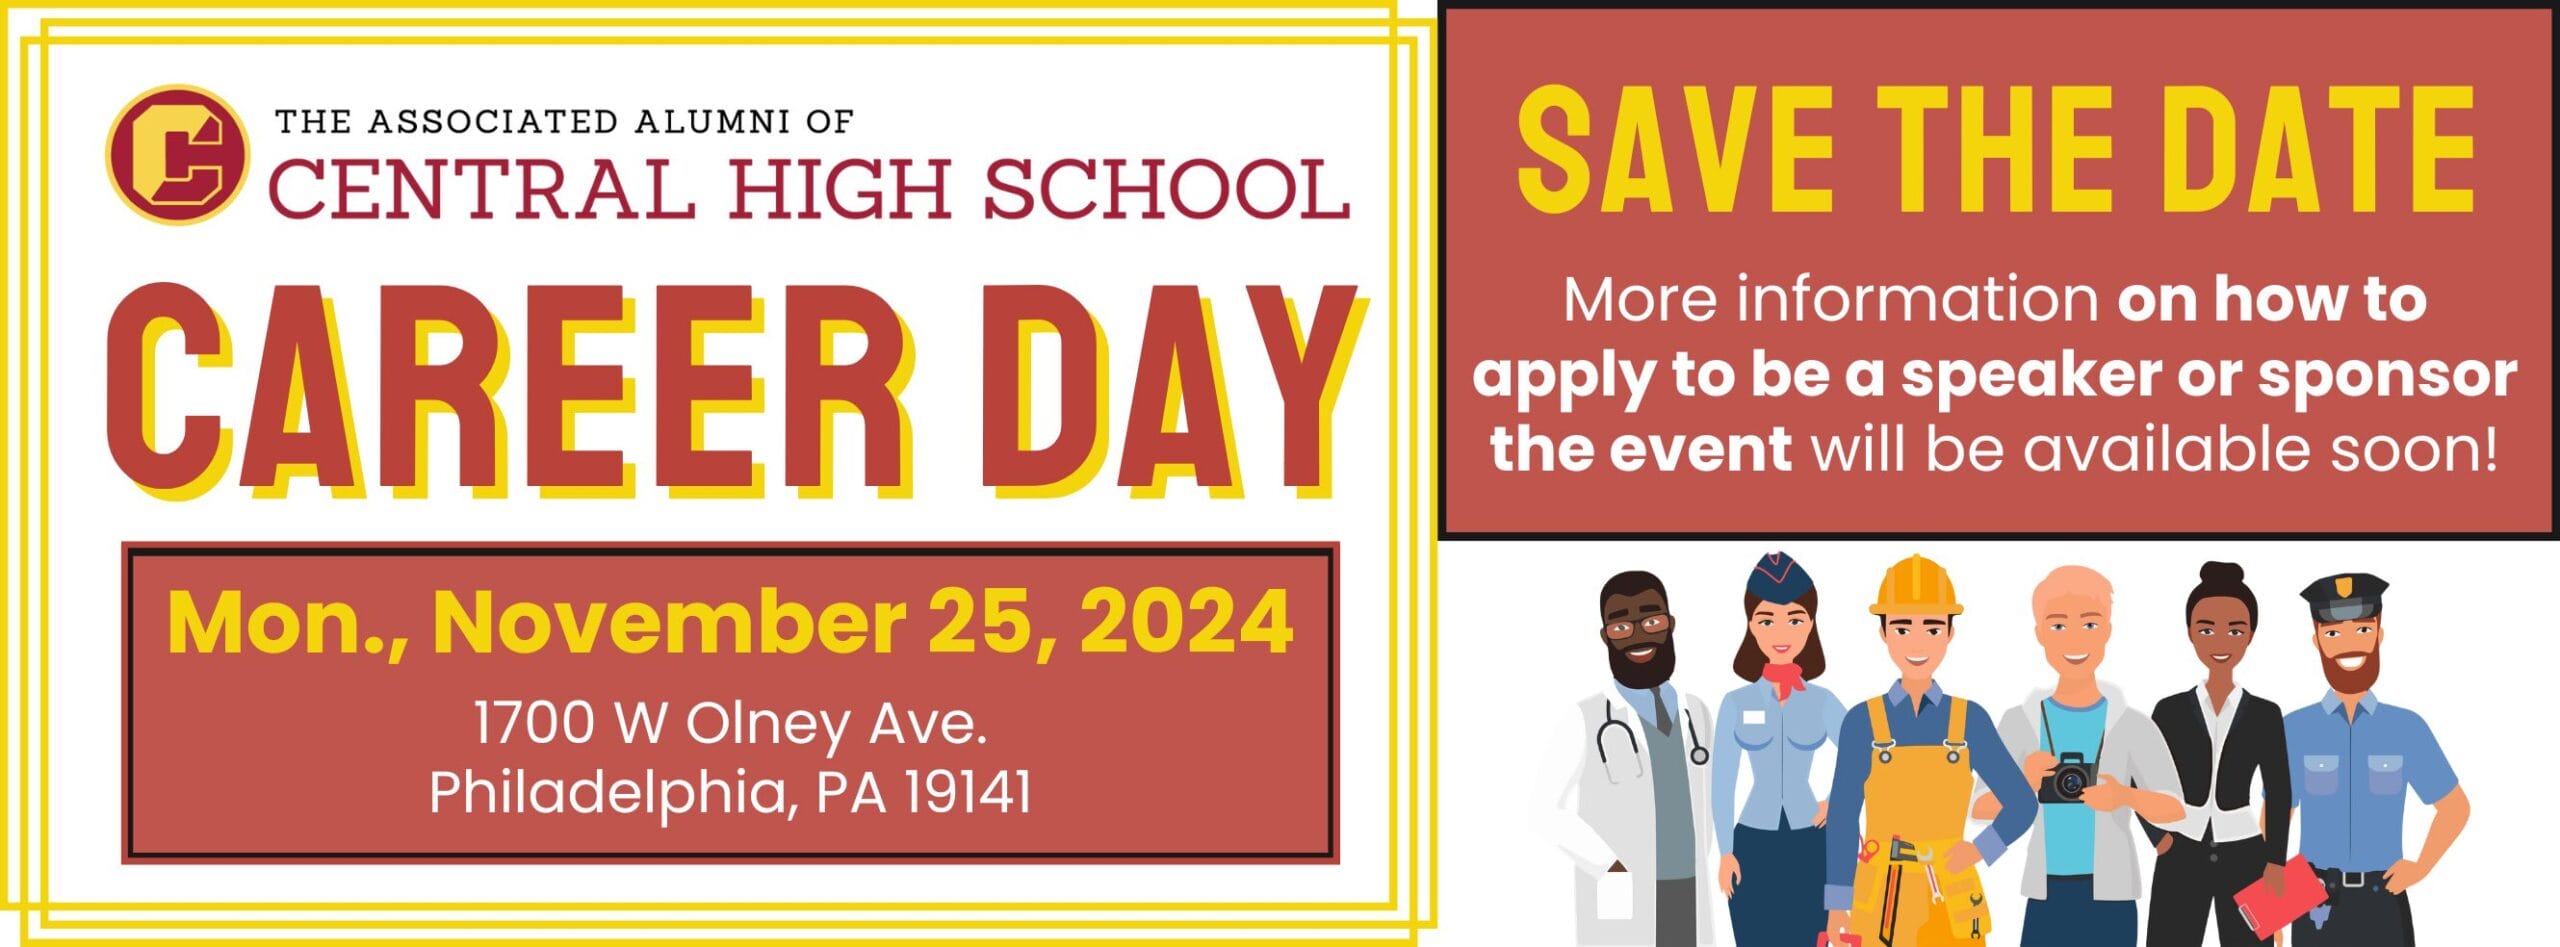 Career Day Save the Date